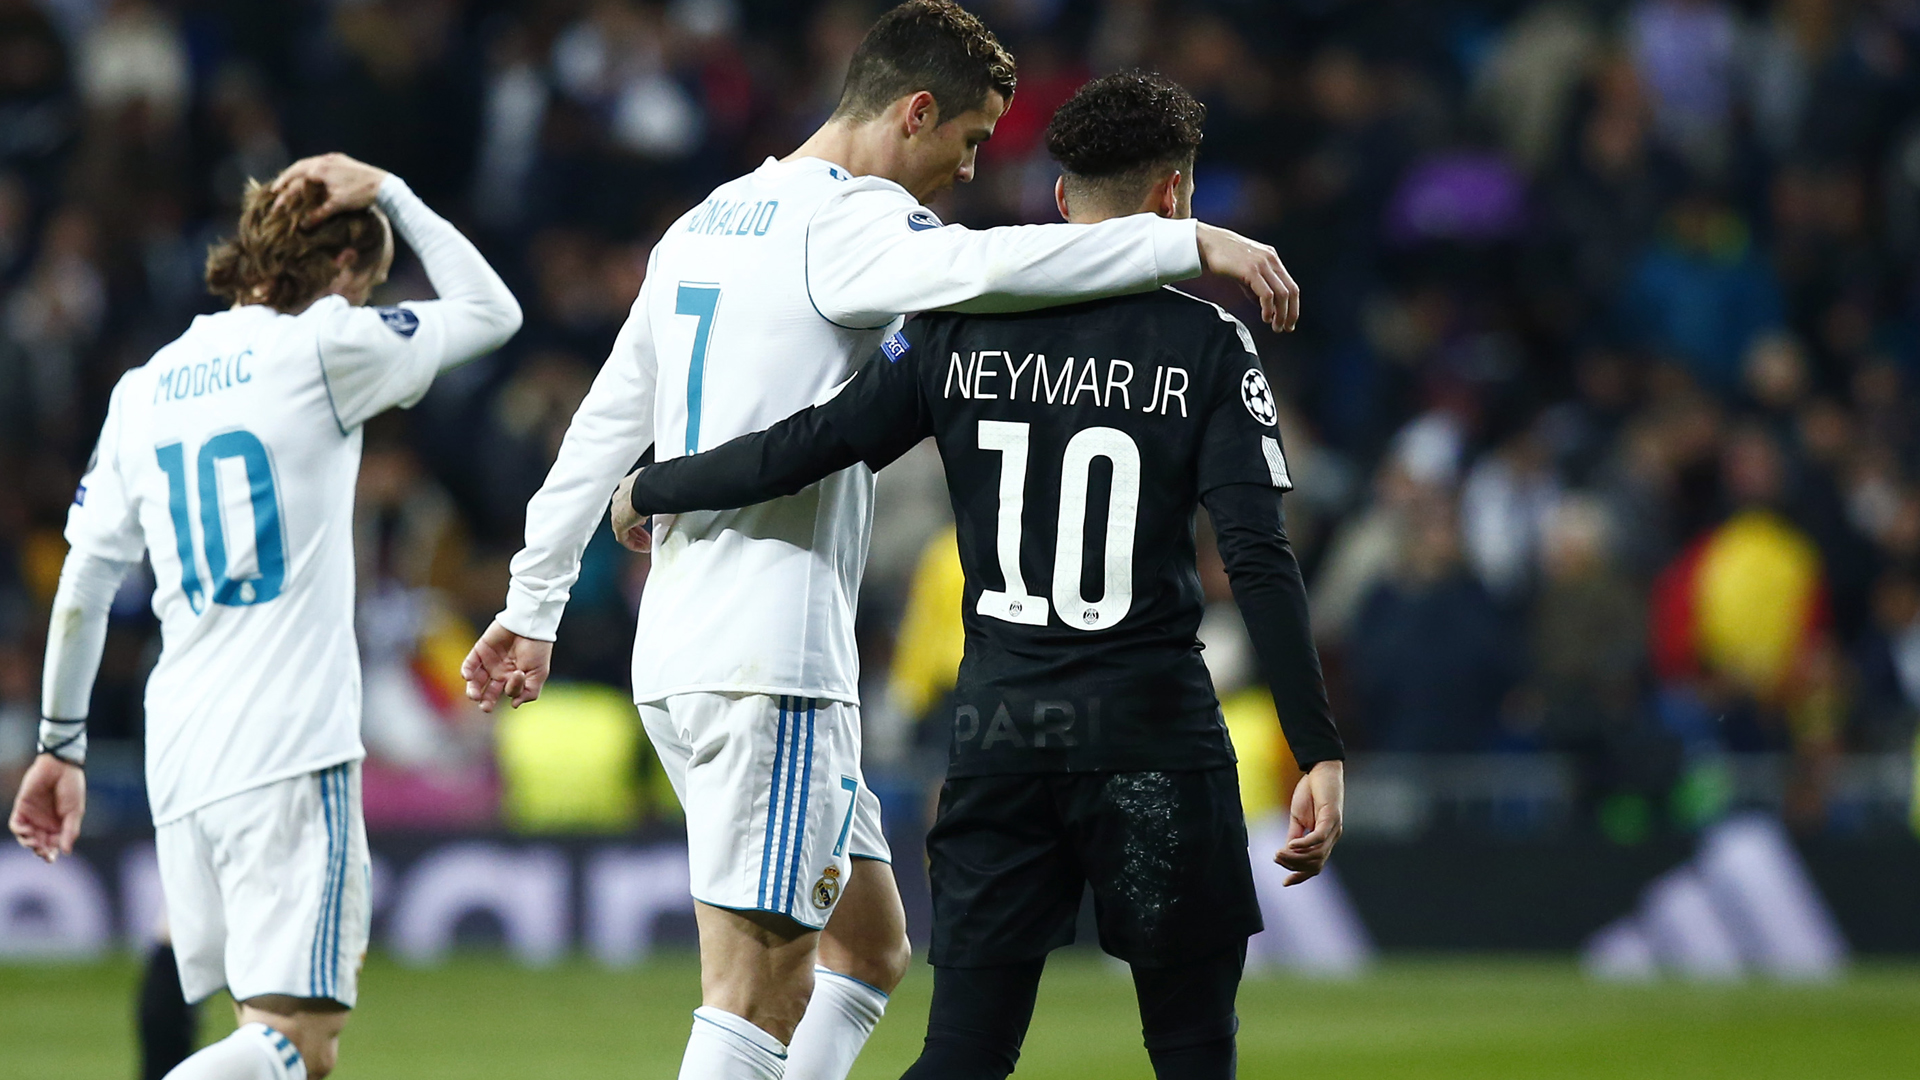 Neymar transfer news: Ronaldo says Cristiano and Neymar would be good together at ...1920 x 1080